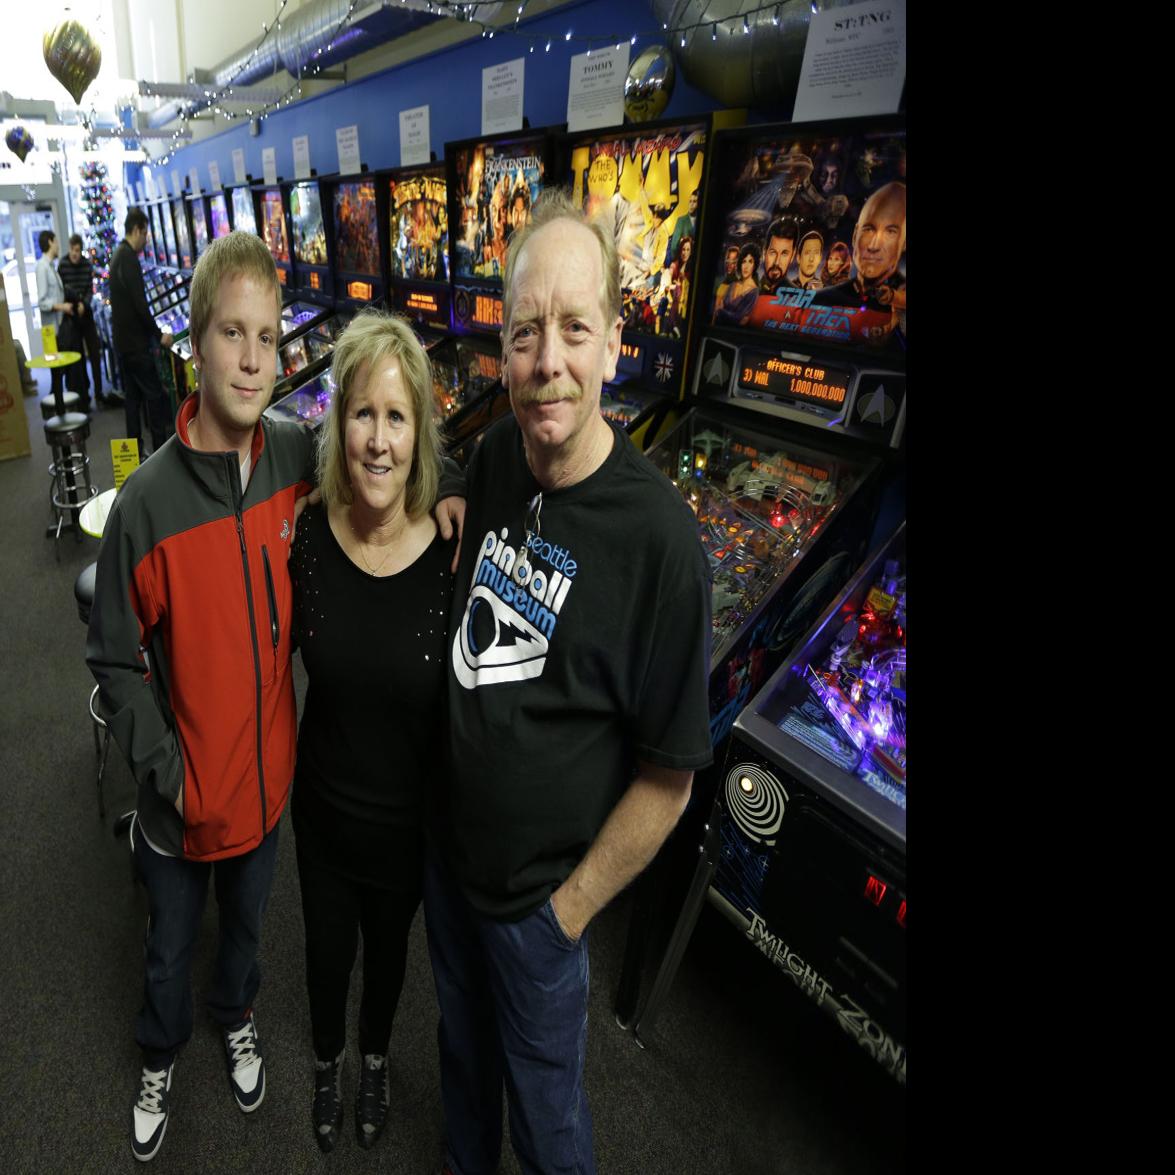 New home for the Las Vegas Pinball Hall of Fame: Travel Weekly